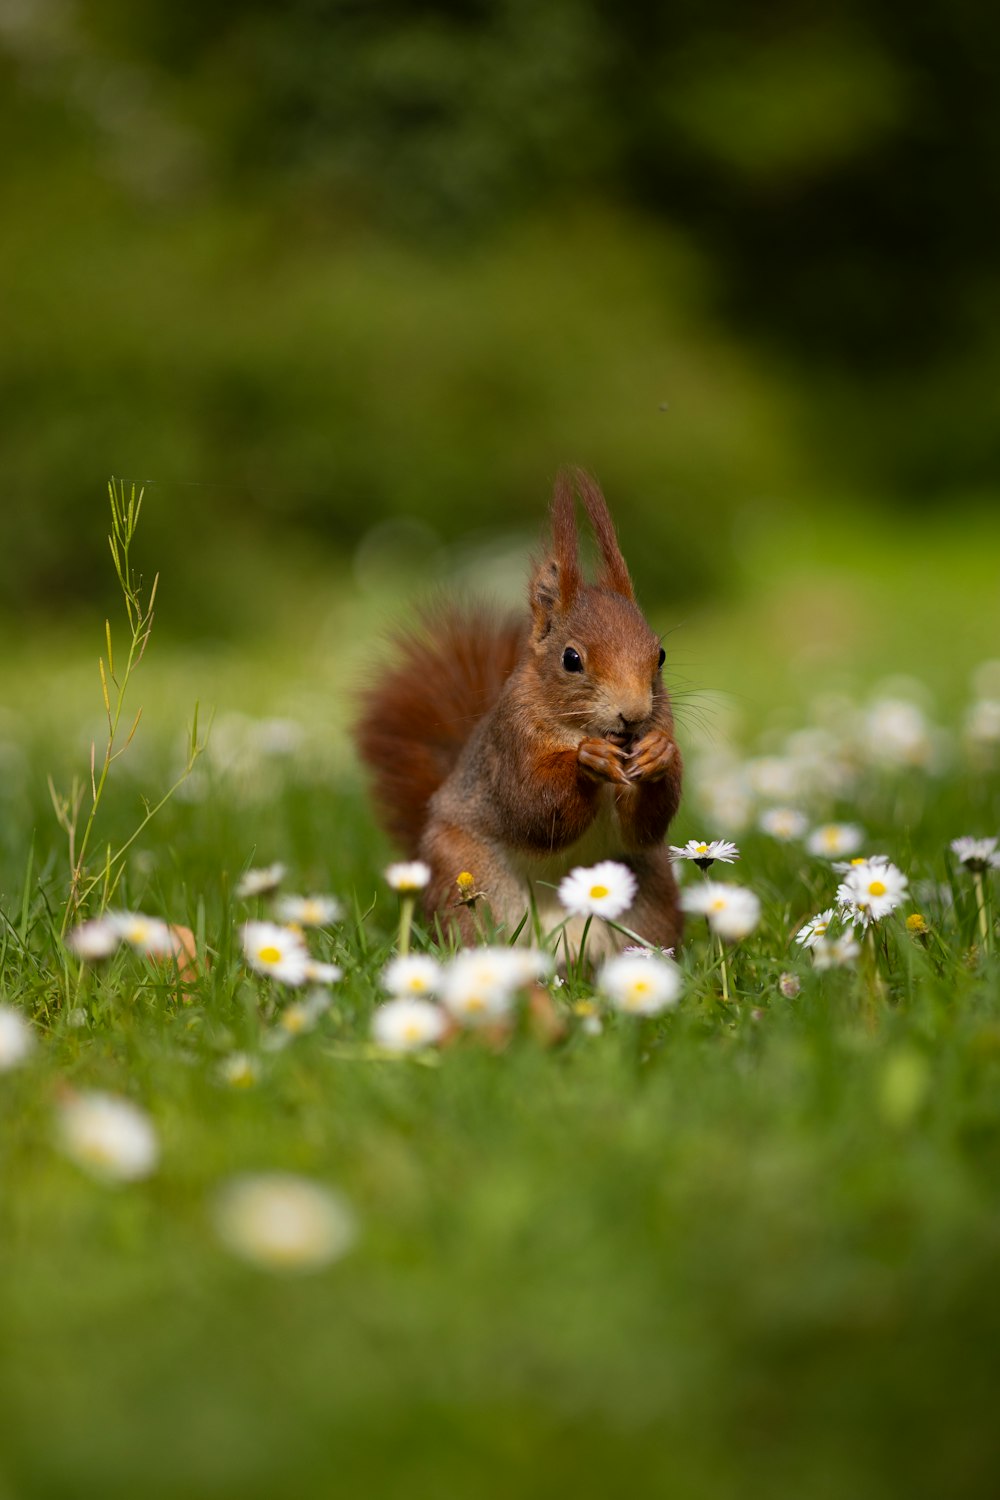 a squirrel sitting in a field of grass and daisies